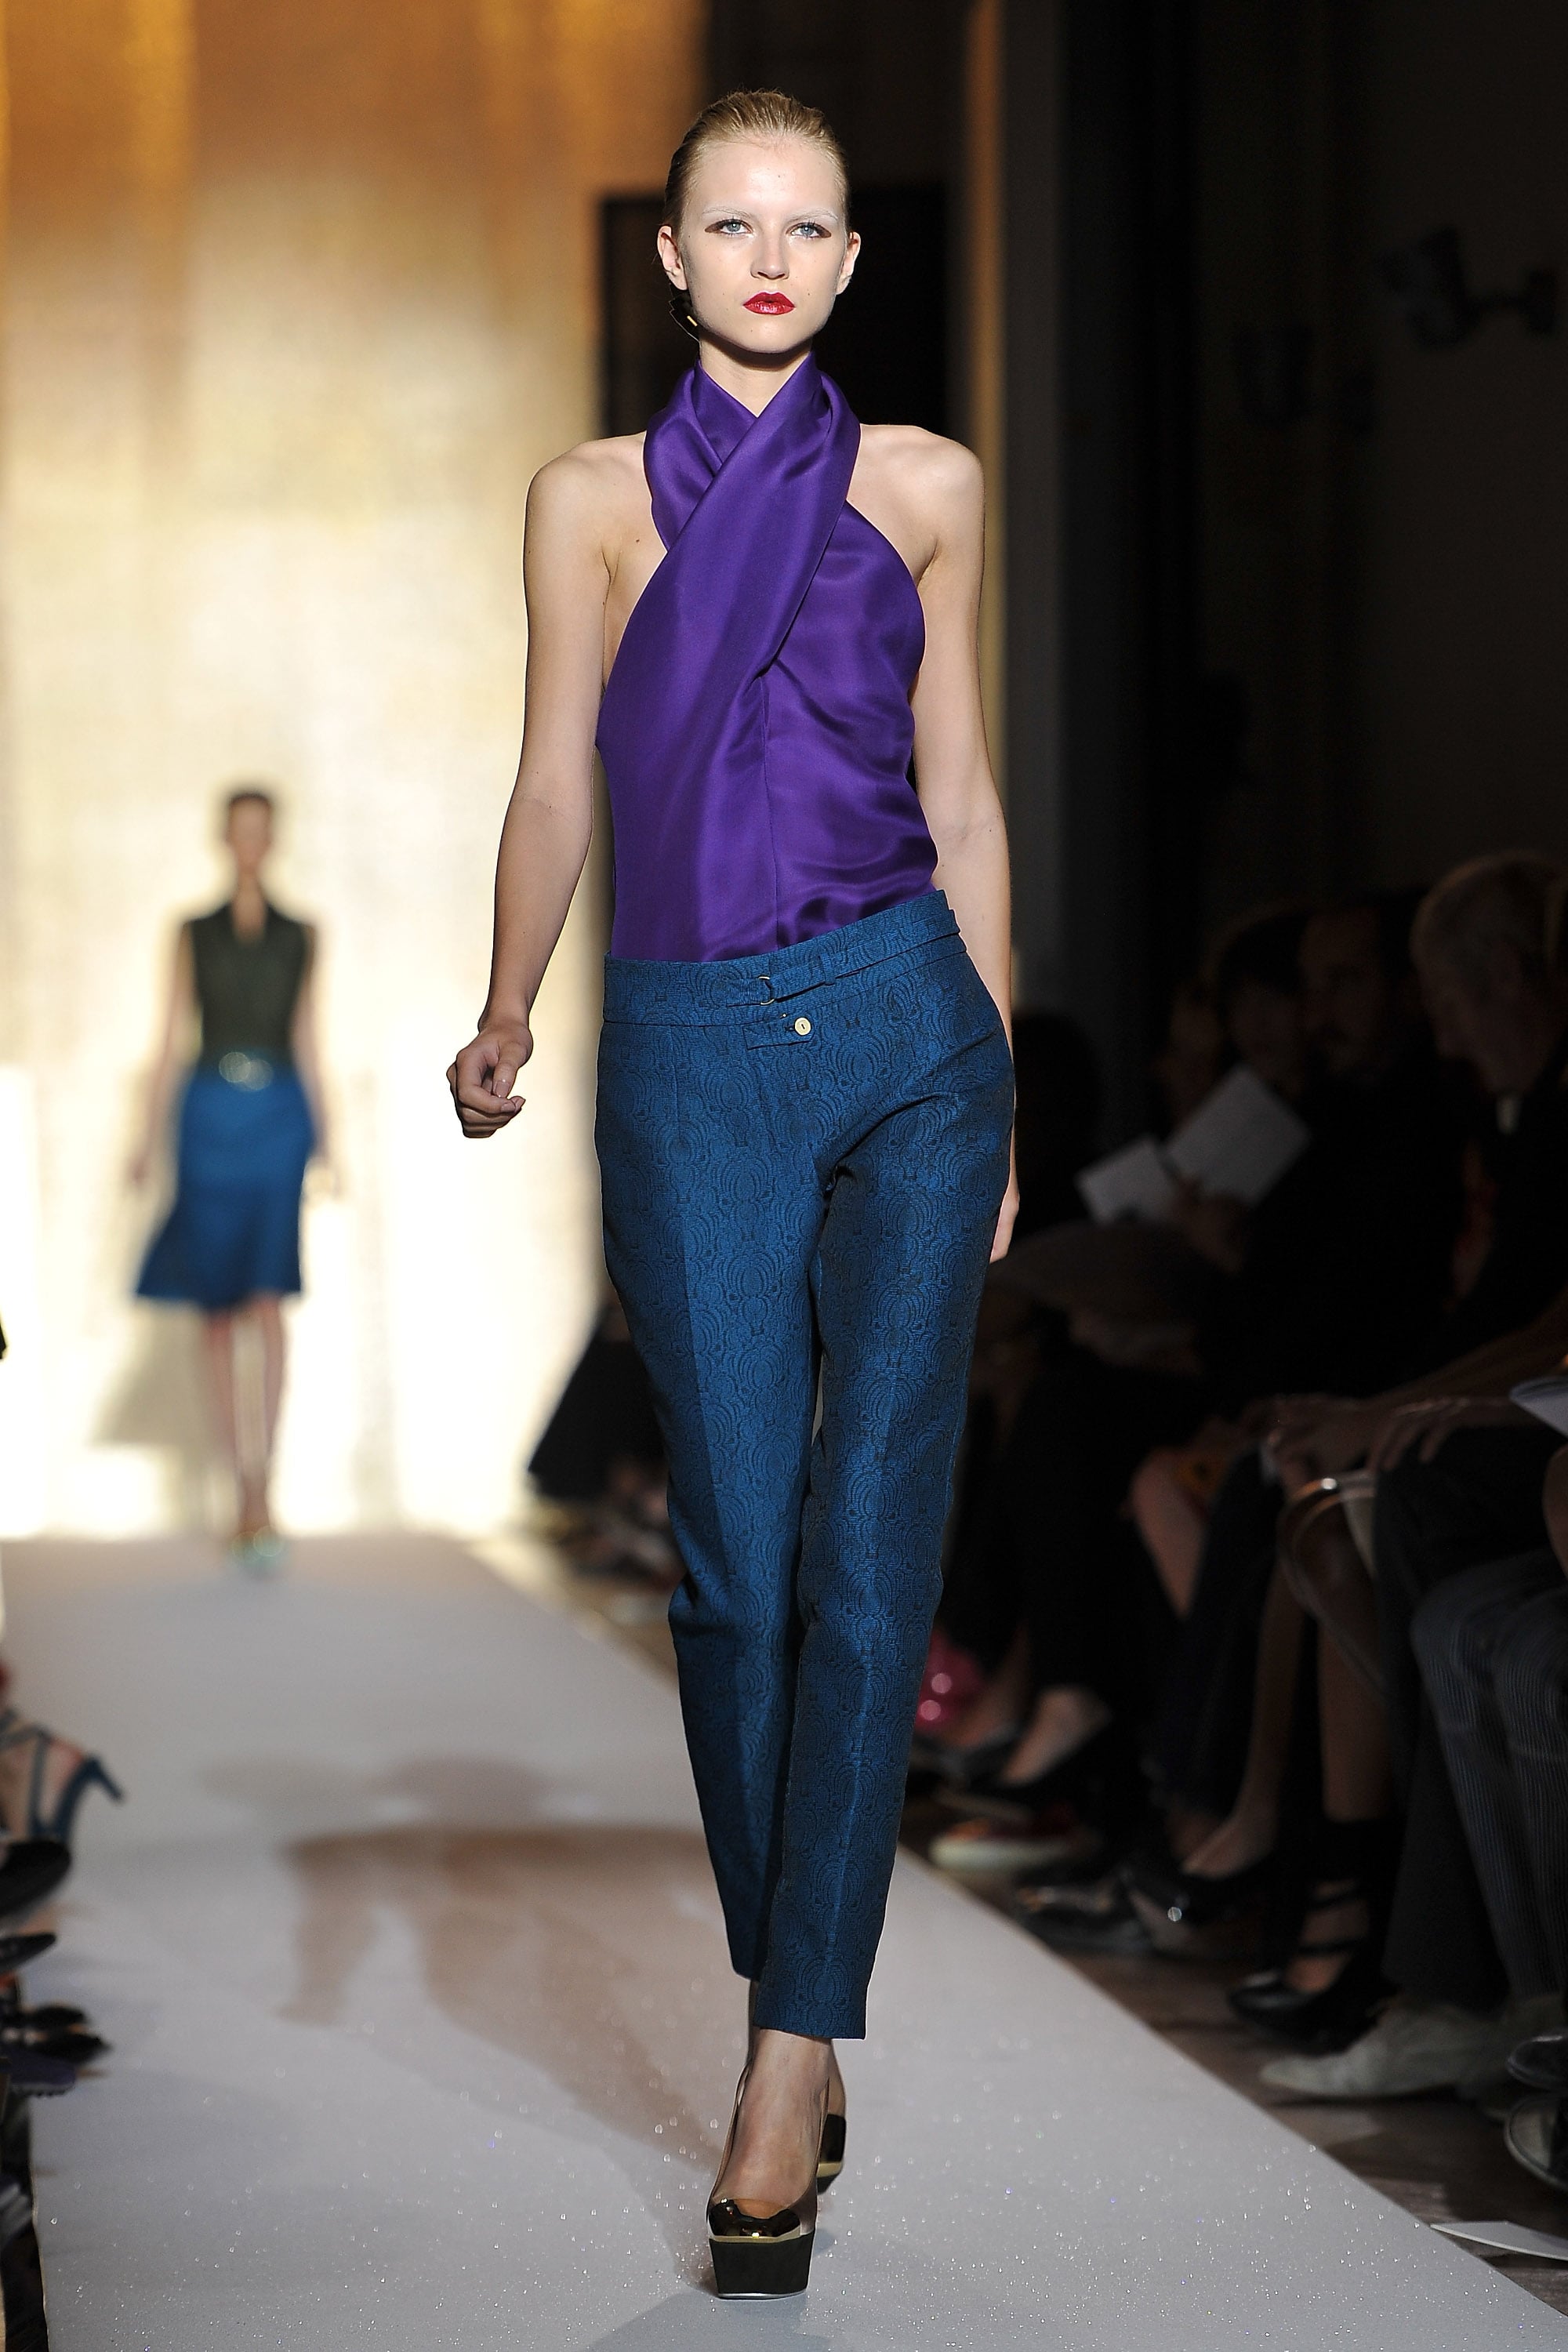 Review and Pictures of Yves Saint Laurent Runway Show at 2012 Spring ...